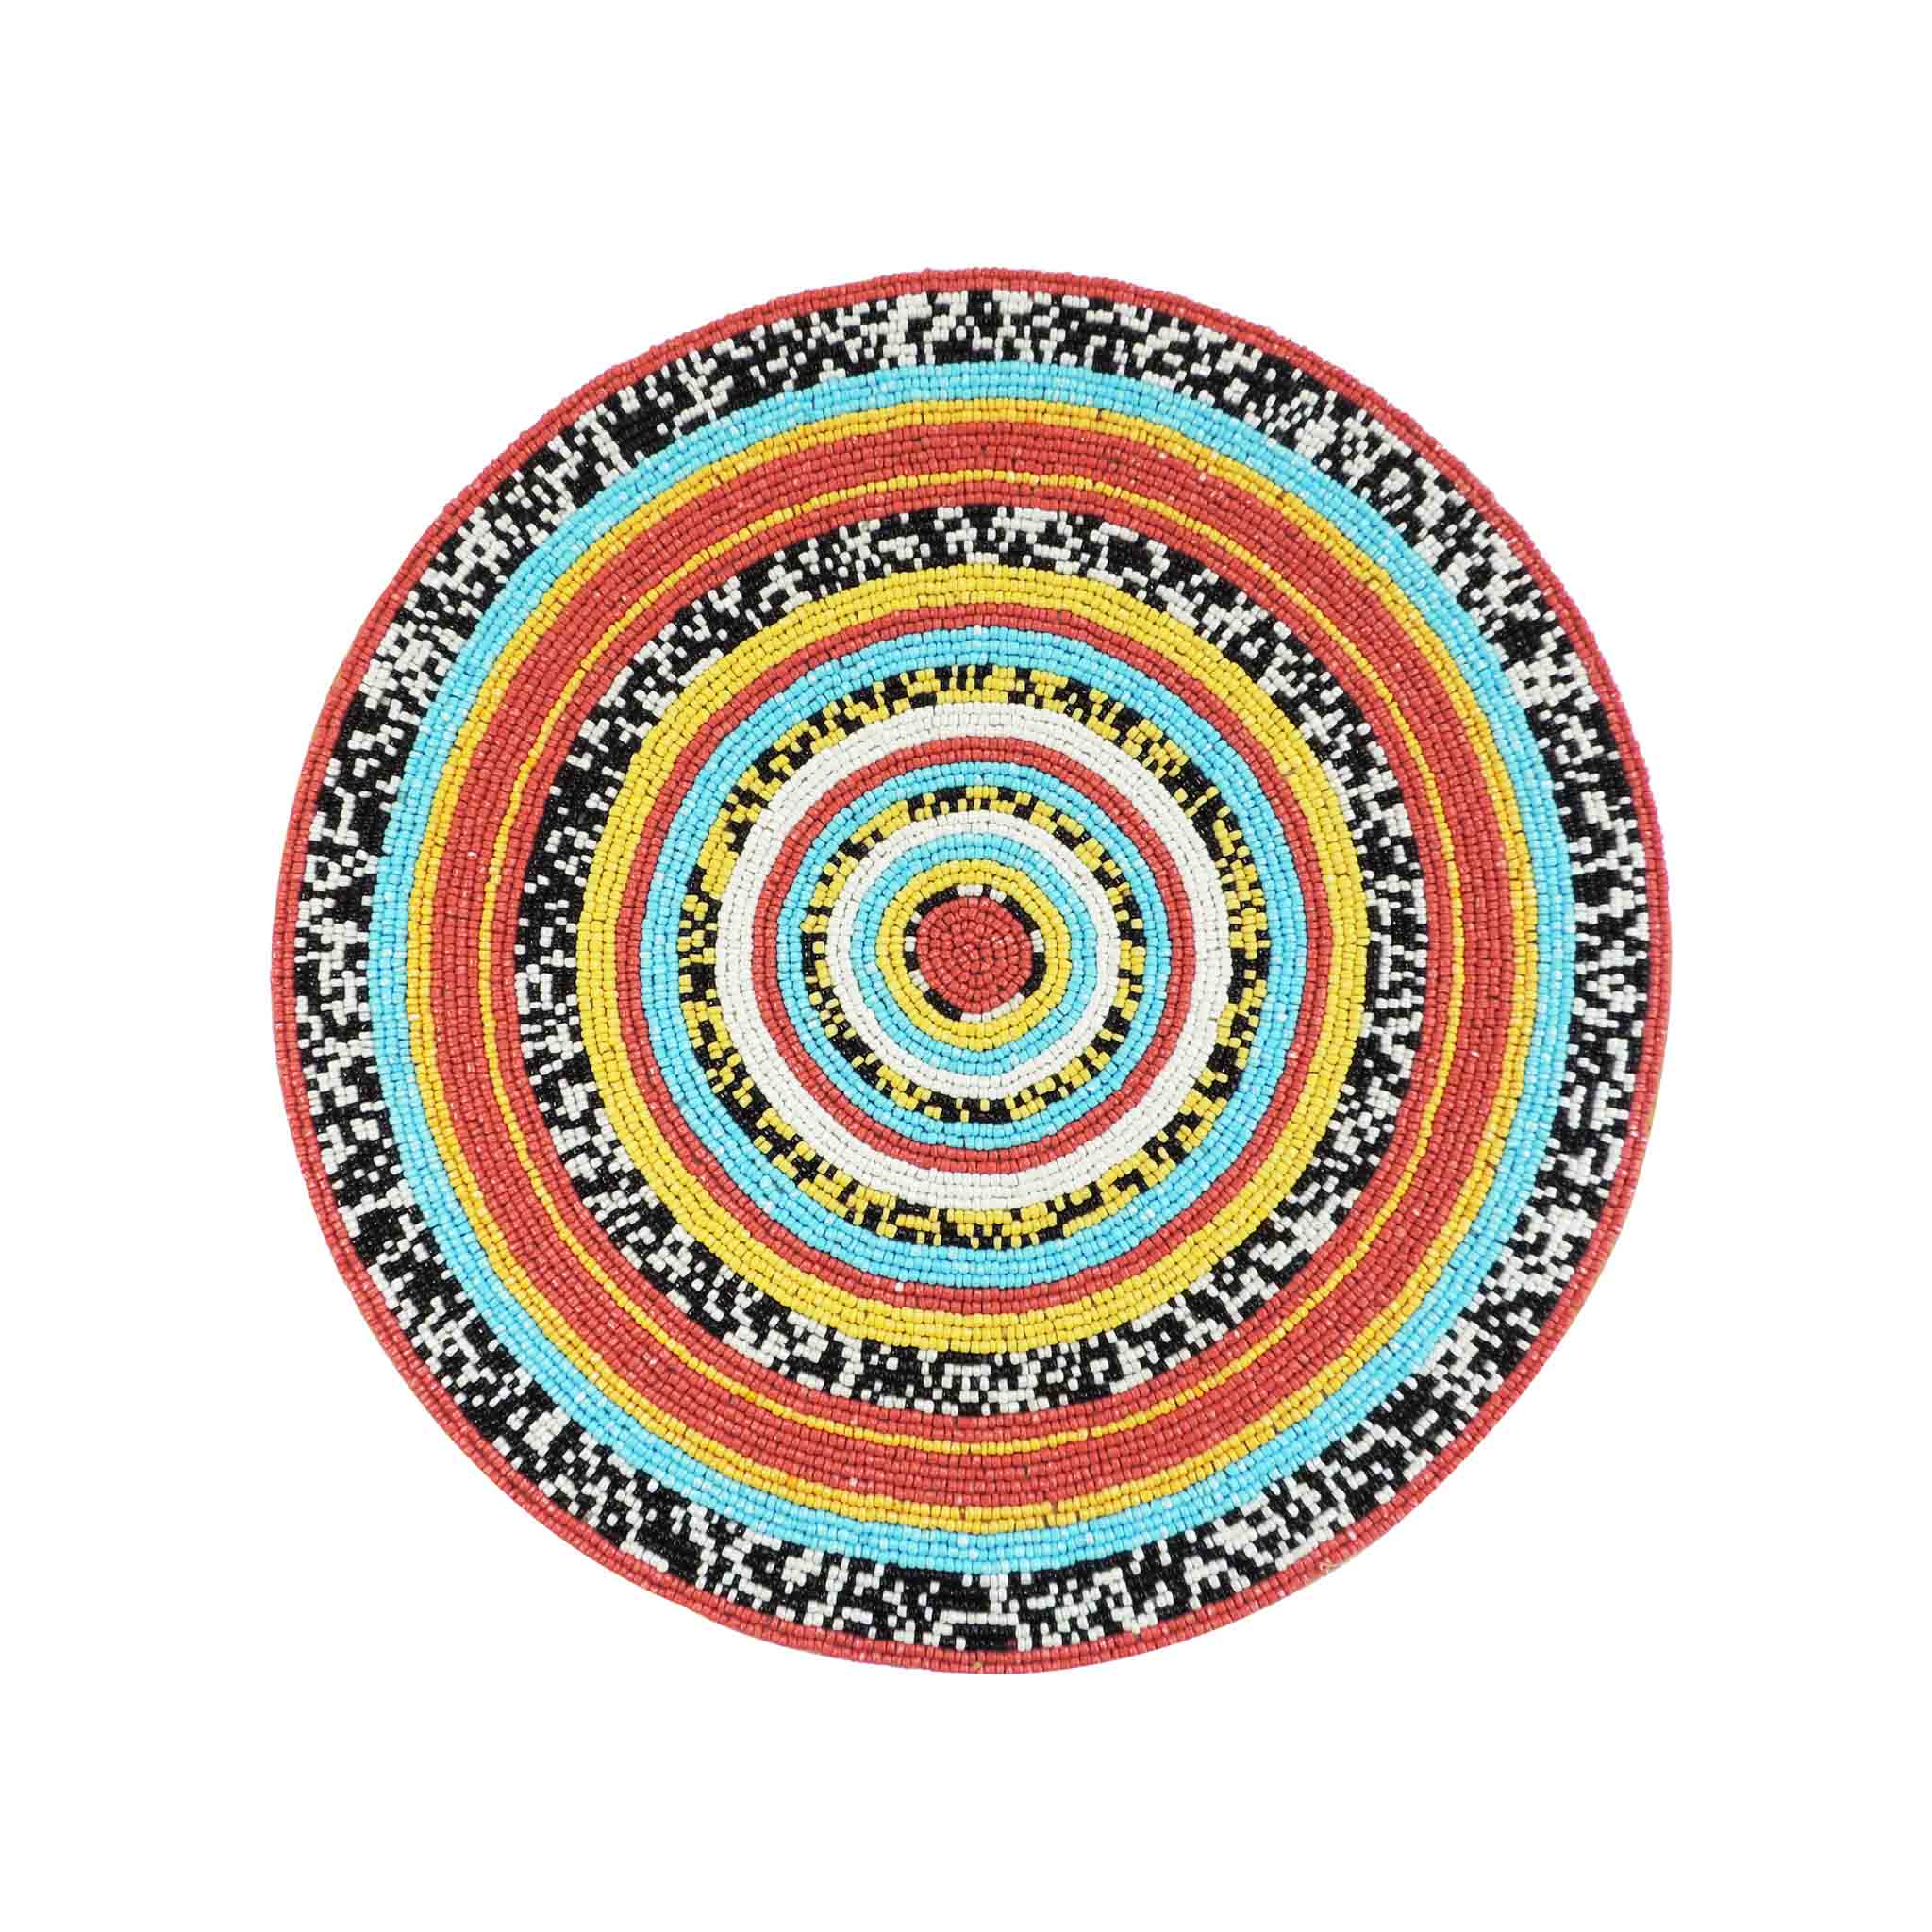 Fiesta Bead Embroidered Placemat<br>Color: Blue, Red, Orange, Yellow<br>Size: 14" Round<br>Set of 2/4